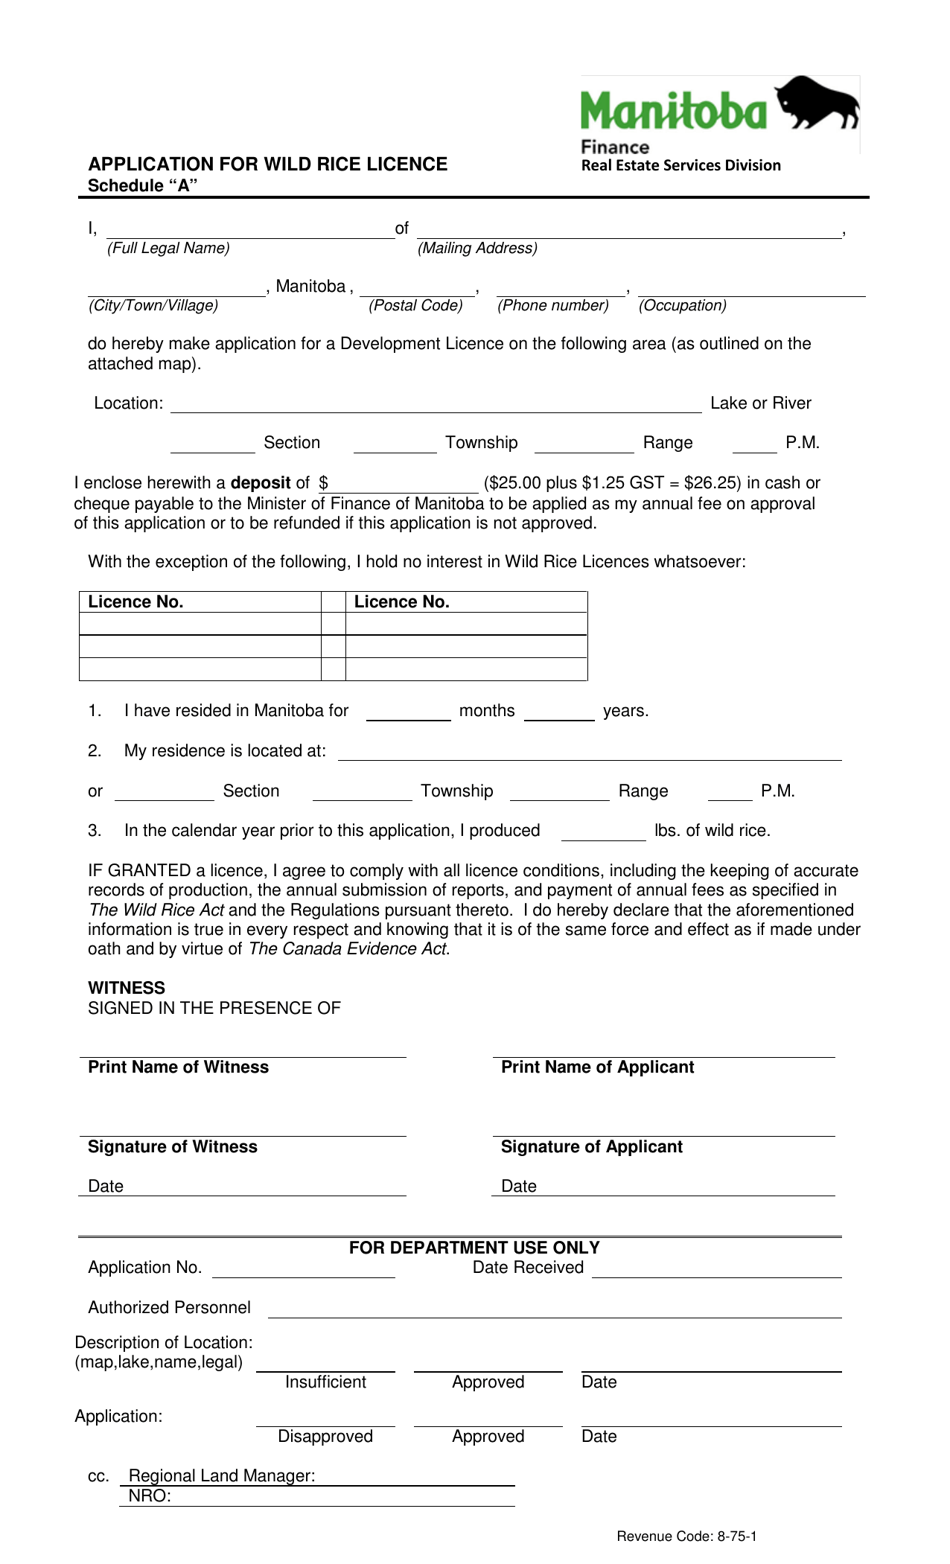 Schedule A Application for Wild Rice Licence - Manitoba, Canada, Page 1